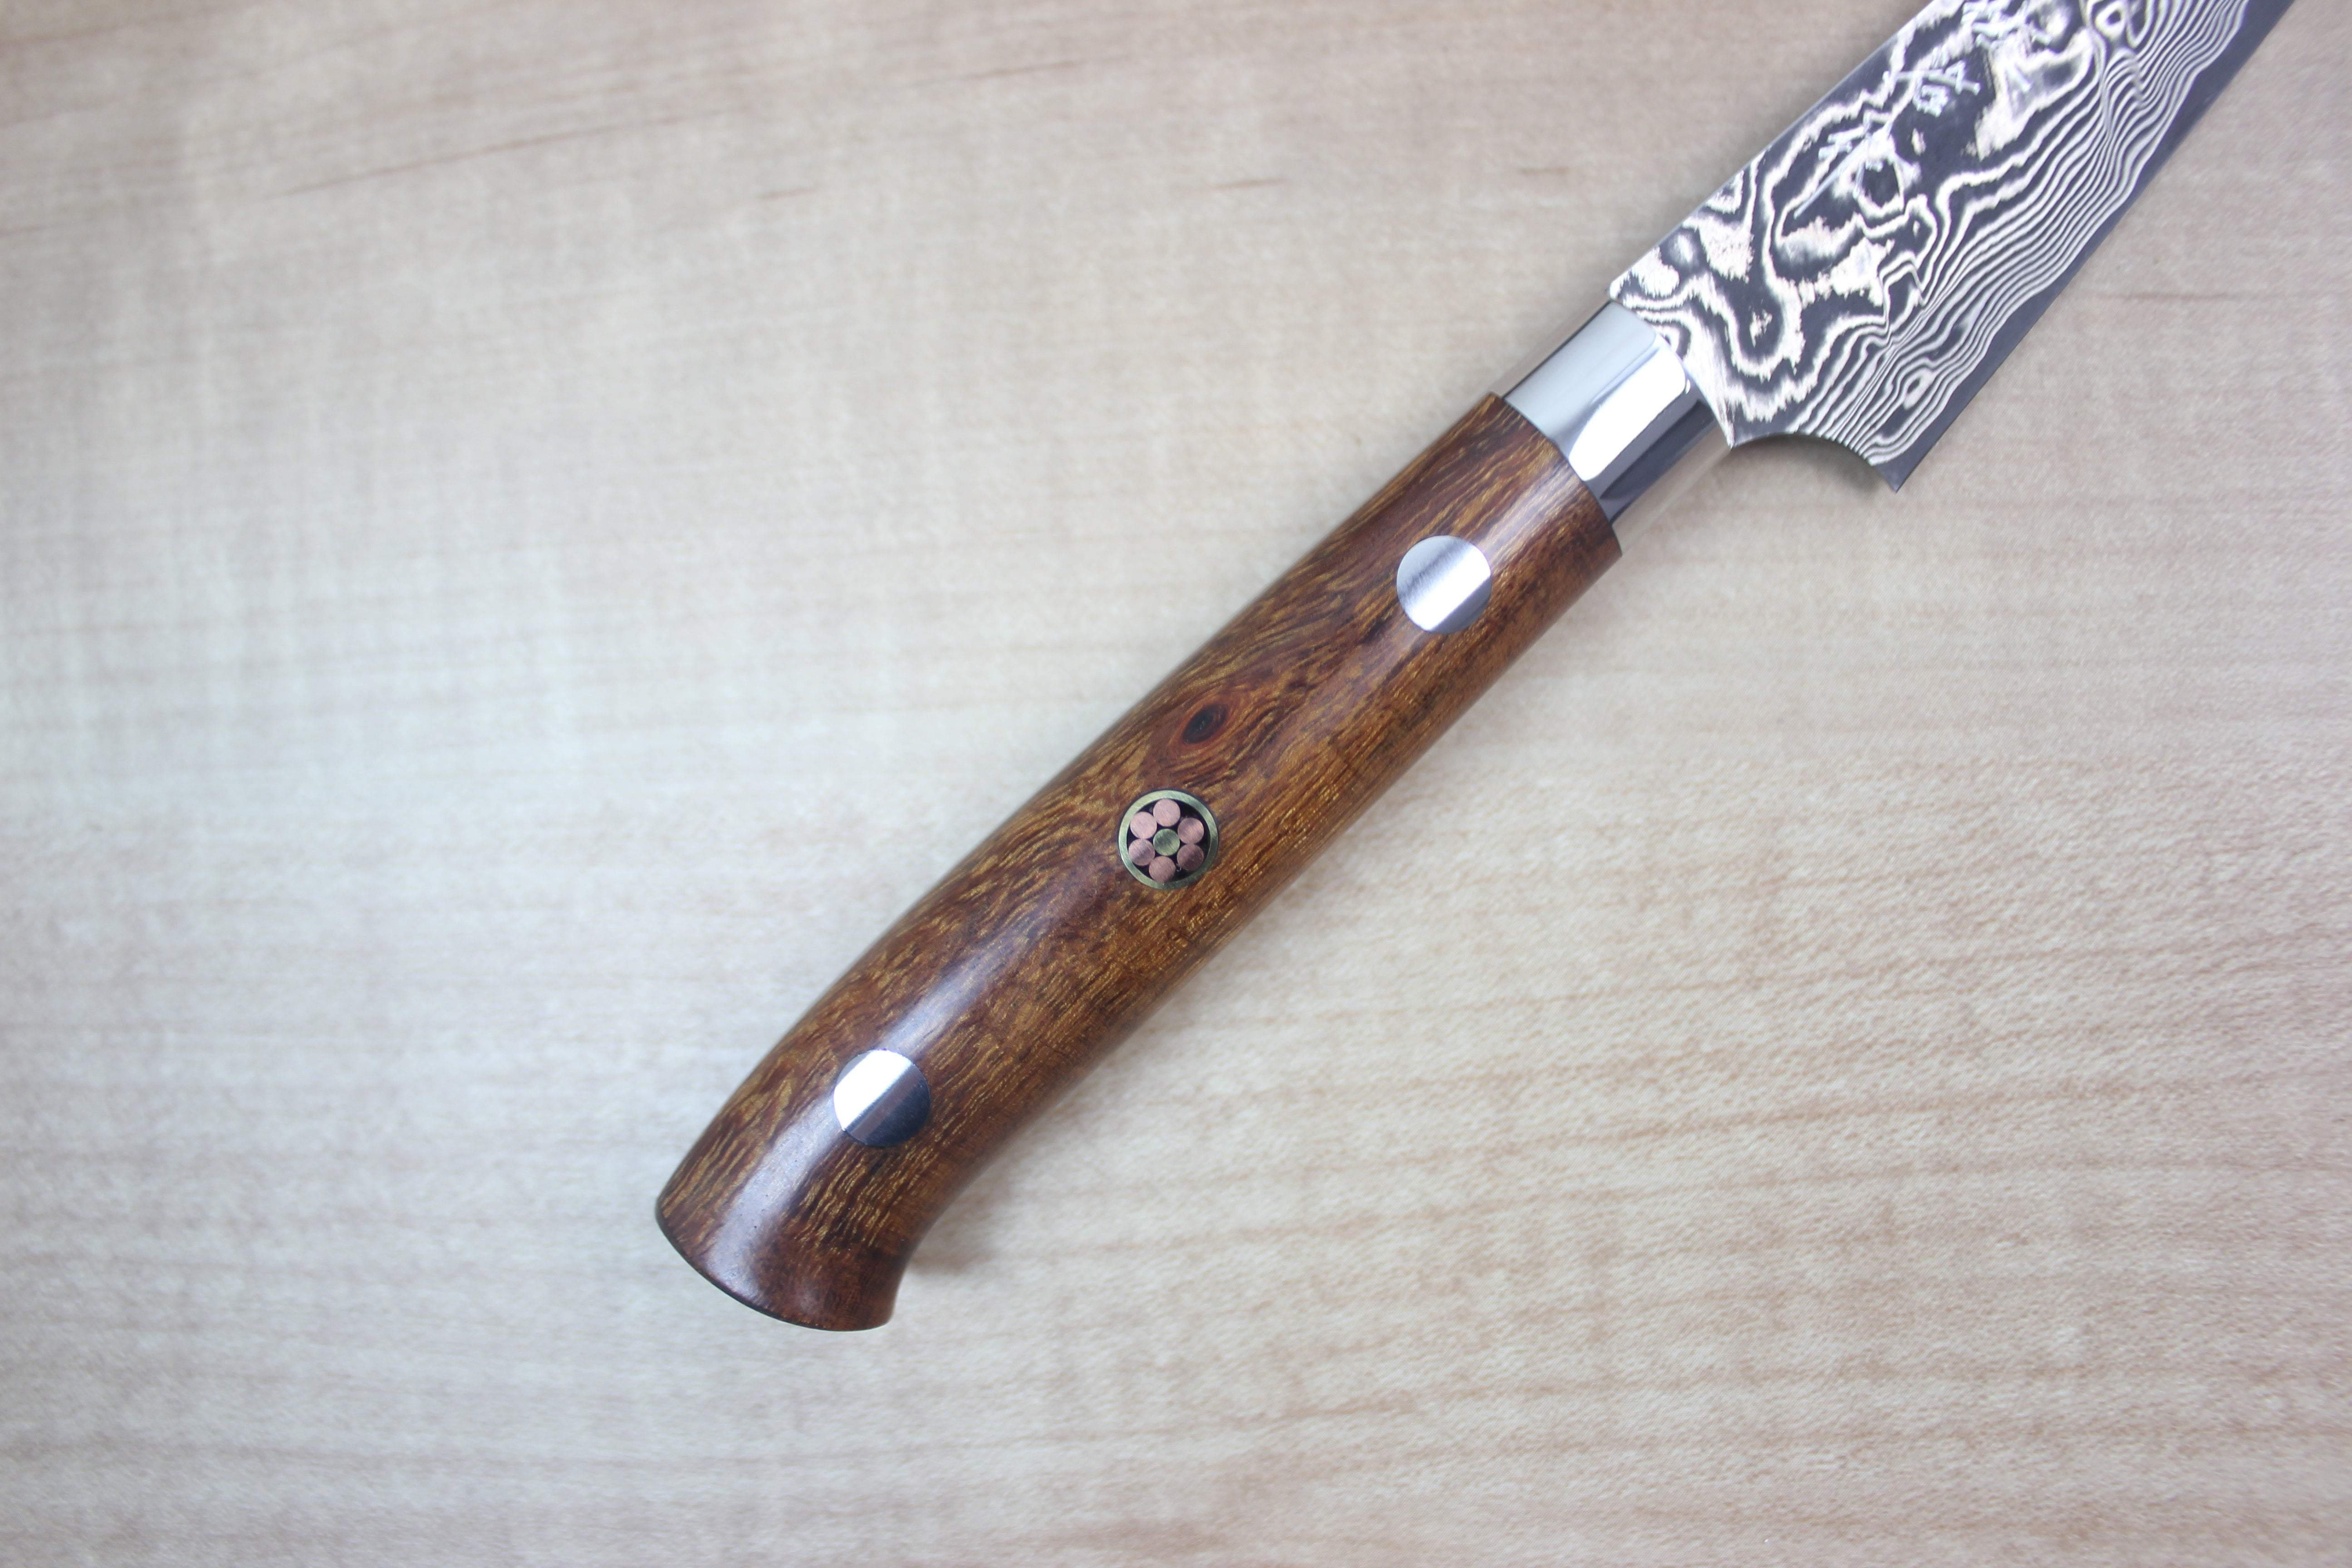 2-3/4 Paring Knife with Sheath